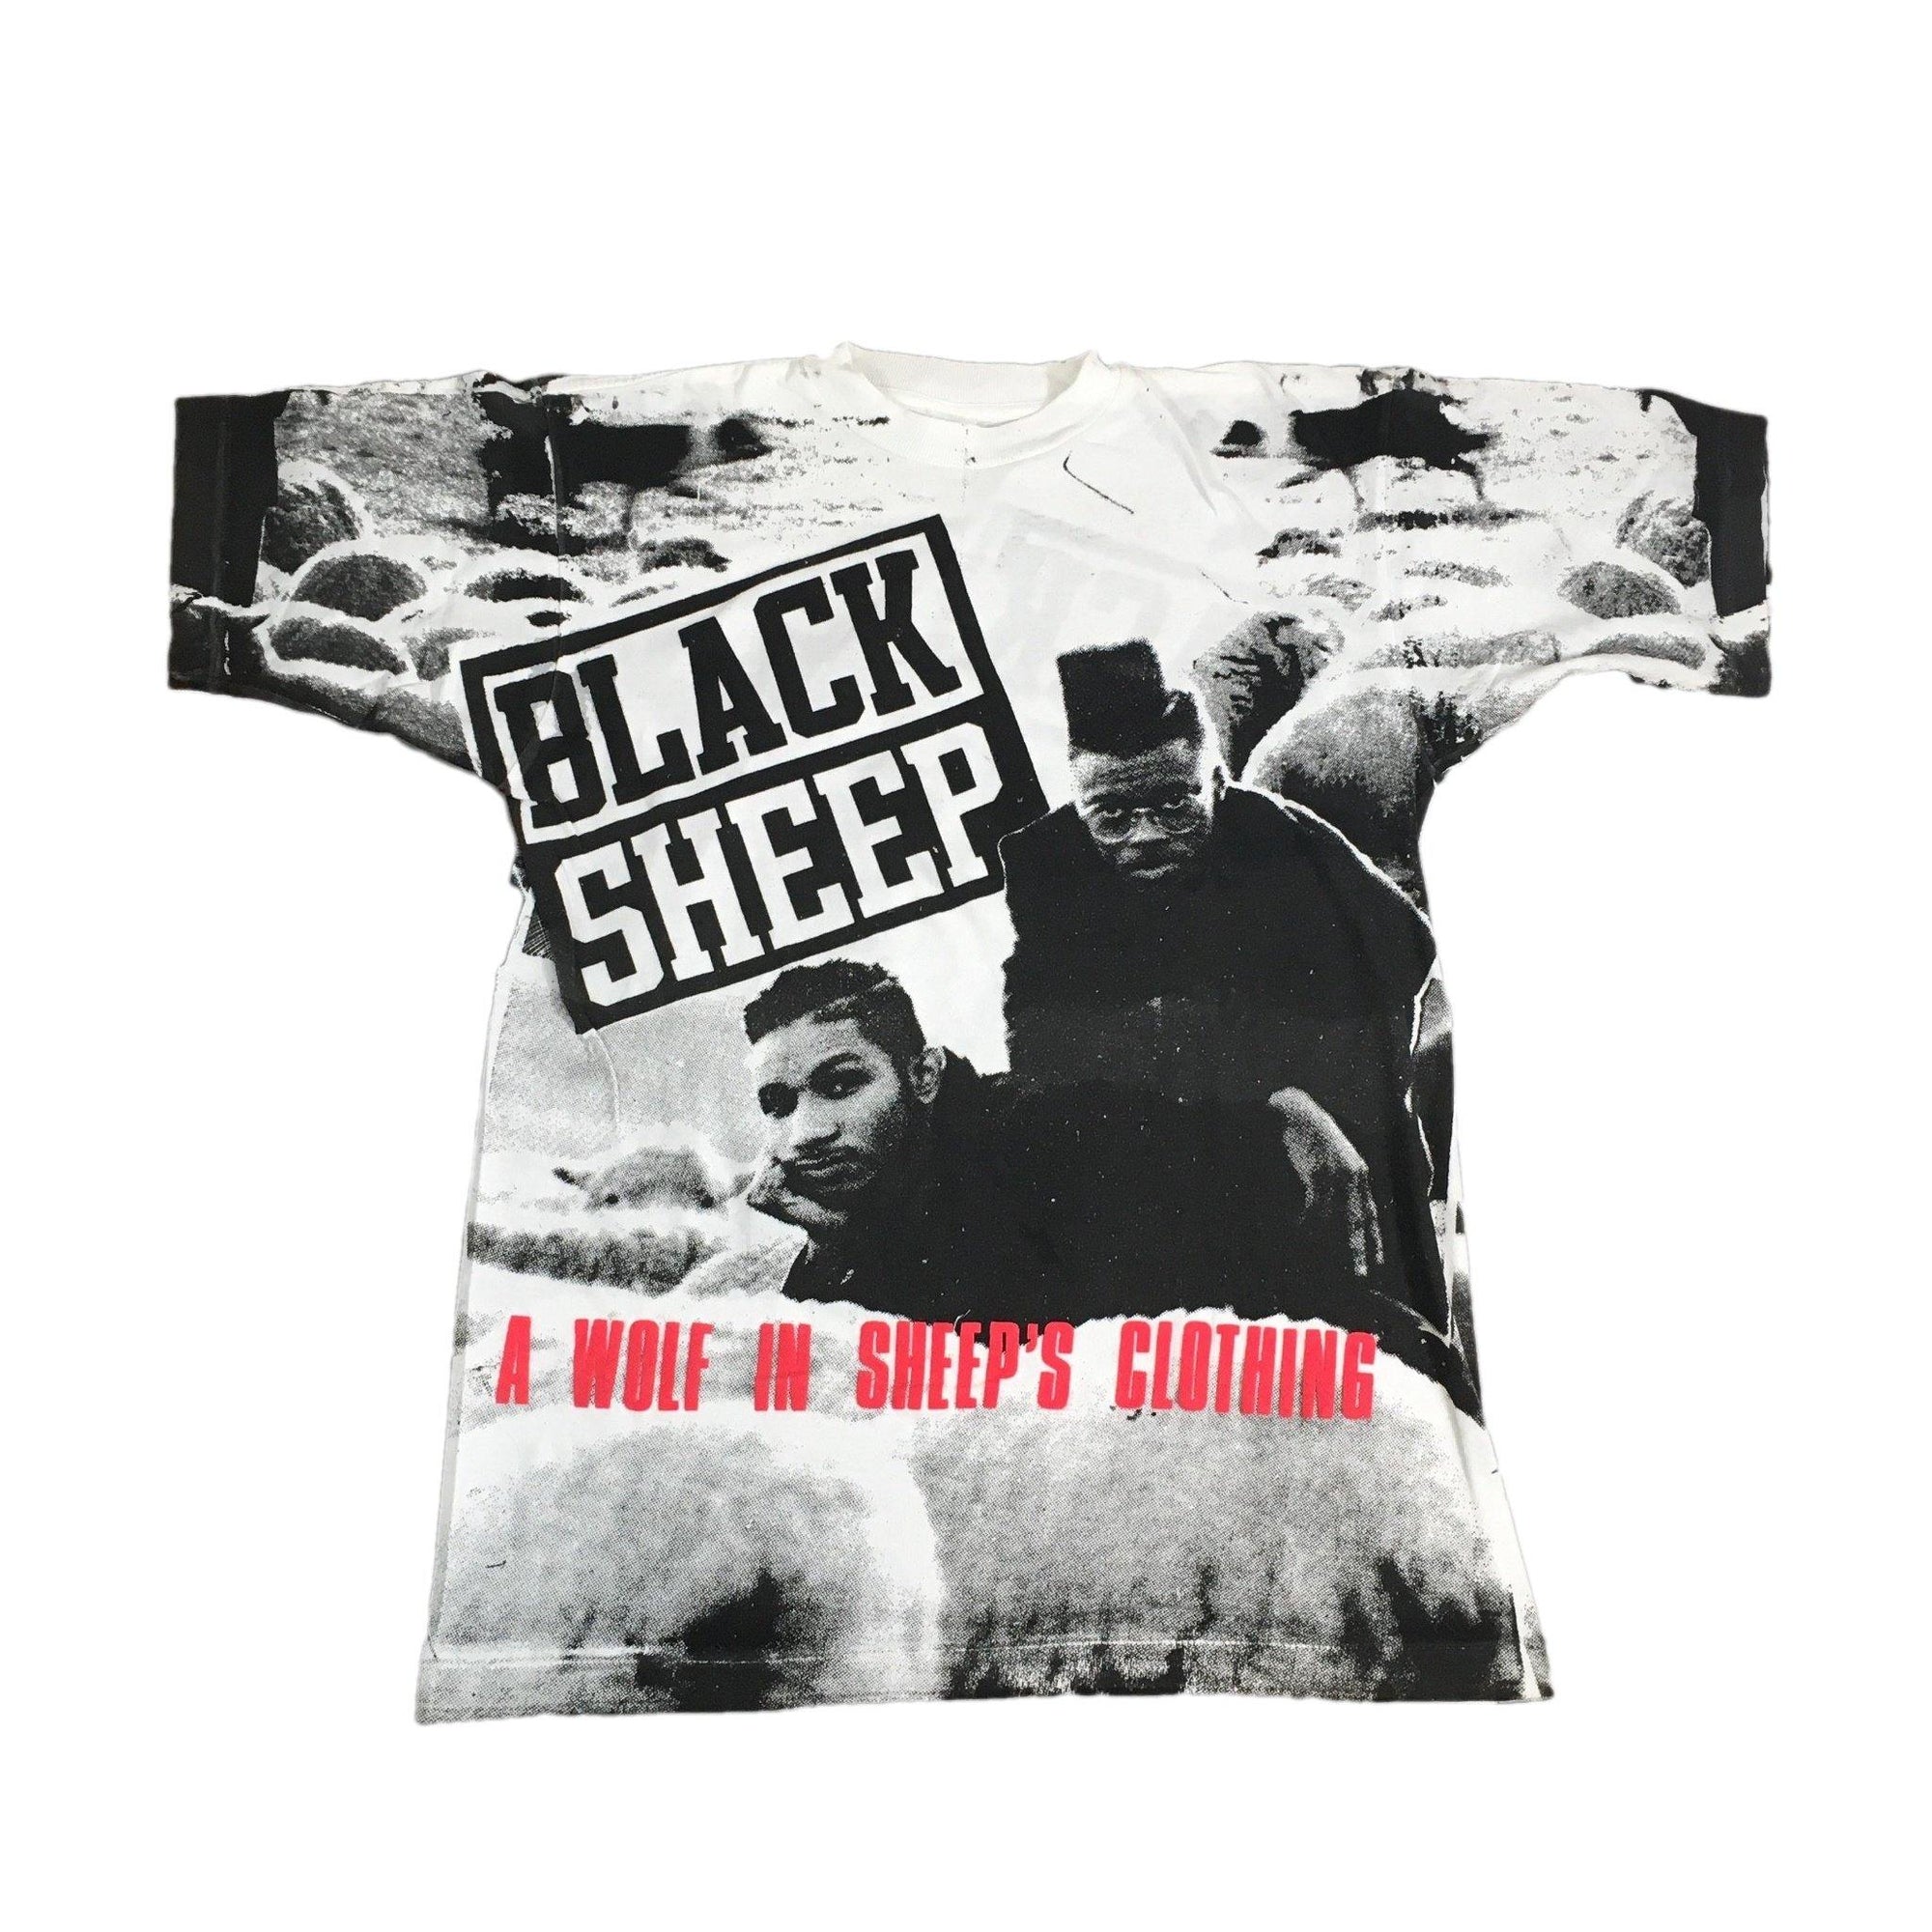 Vintage Black Sheep "A Wolf In Sheep's Clothing" T-Shirt - jointcustodydc